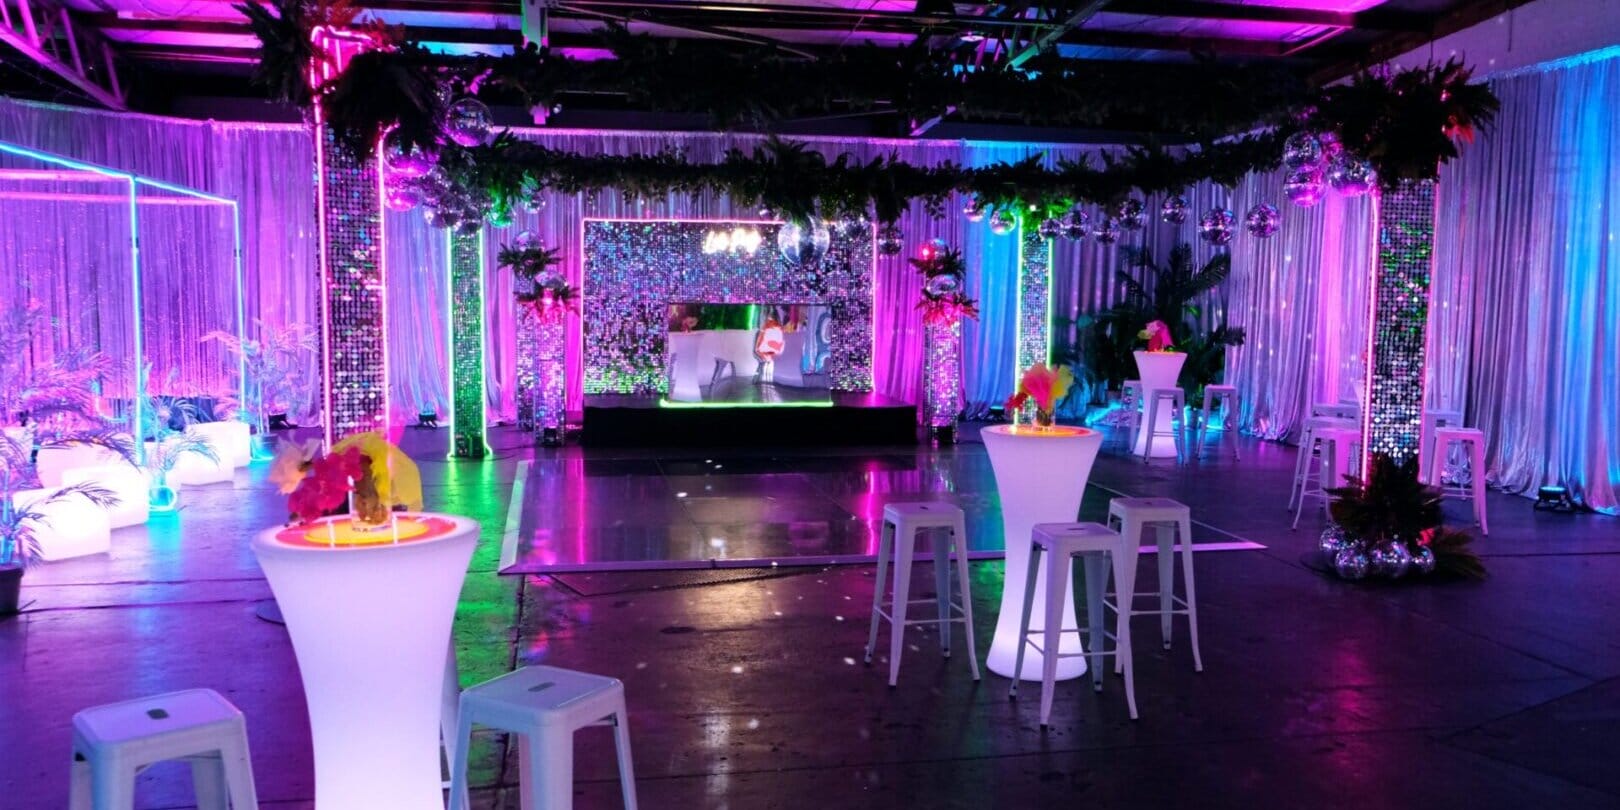 Room shot of neon disco party theme featuring illuminated furniture, bar stools, greenery, dance floor, neon lights, and sequin panels